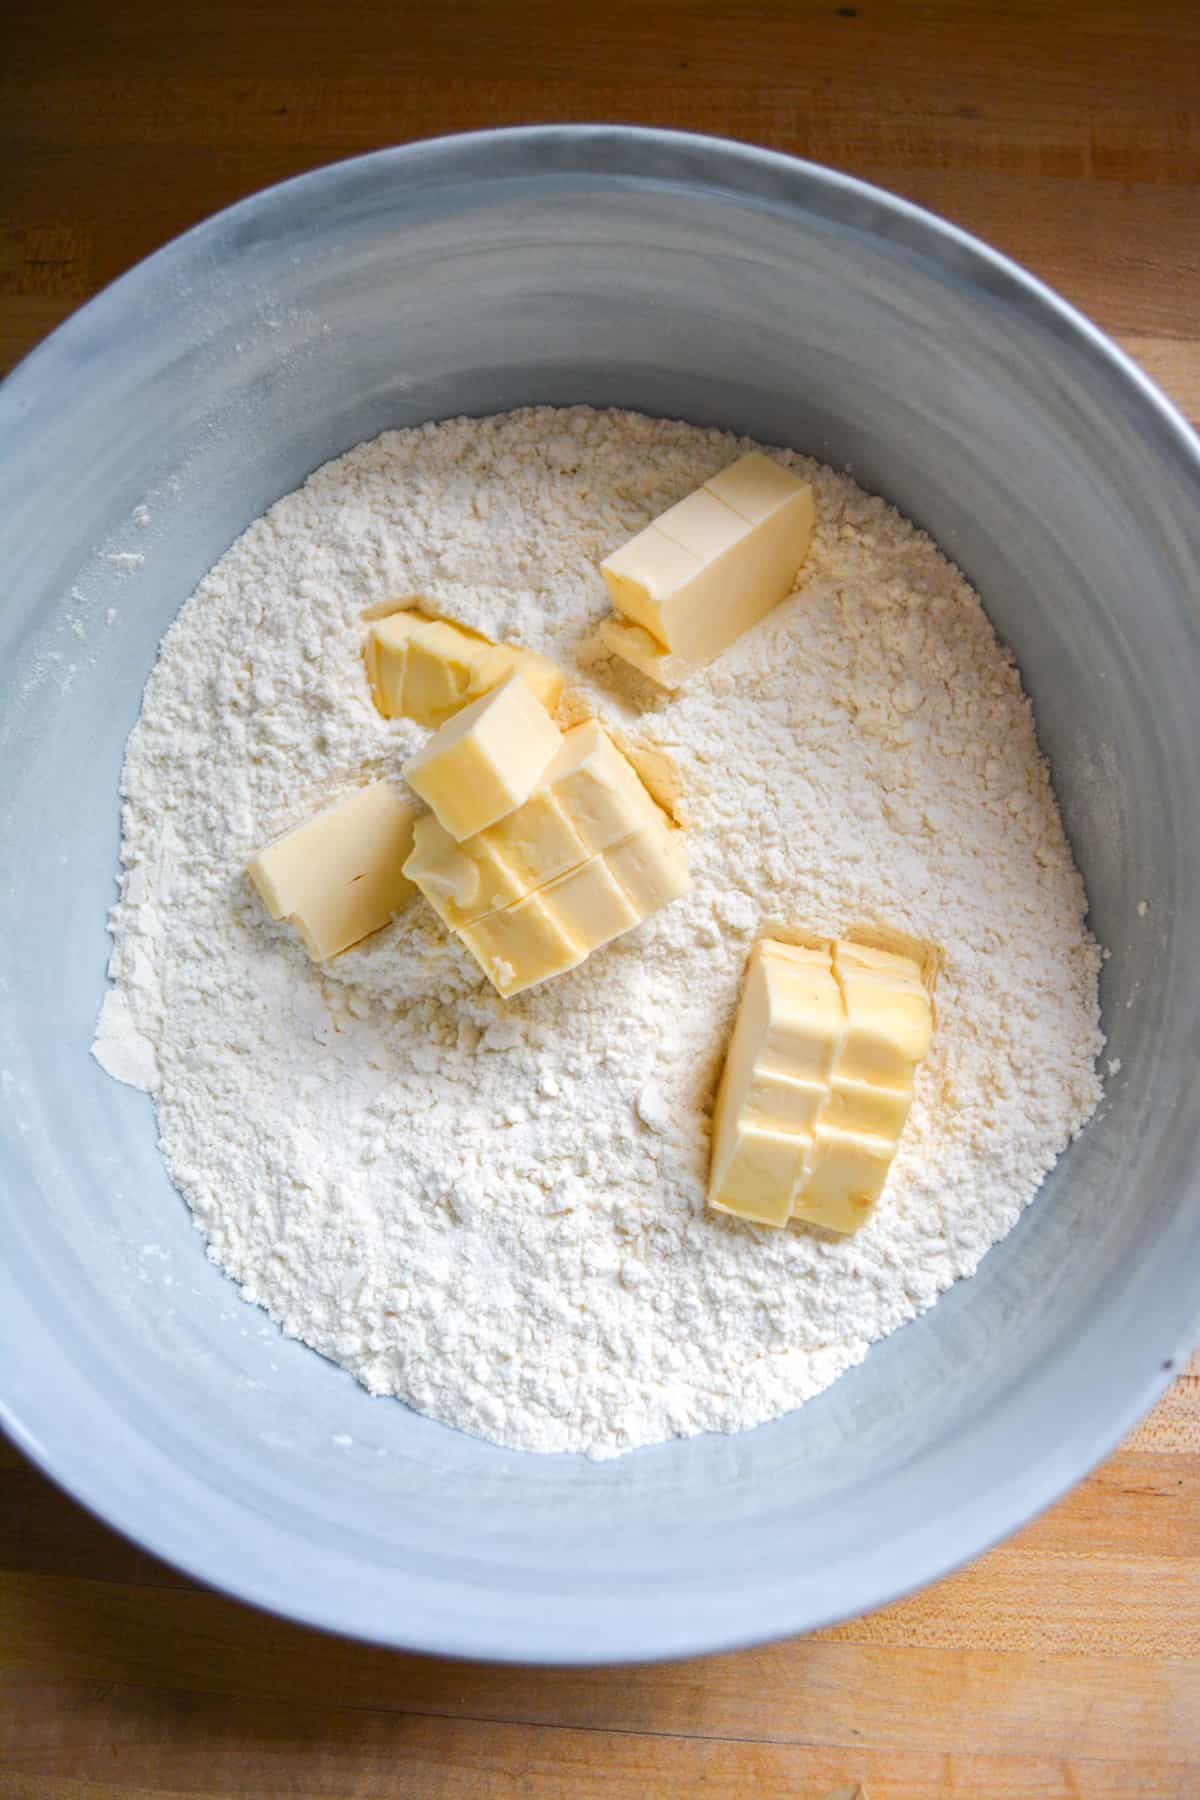 Dry ingredients mixed together in a mixing bowl with cold cubed butter adde on top.